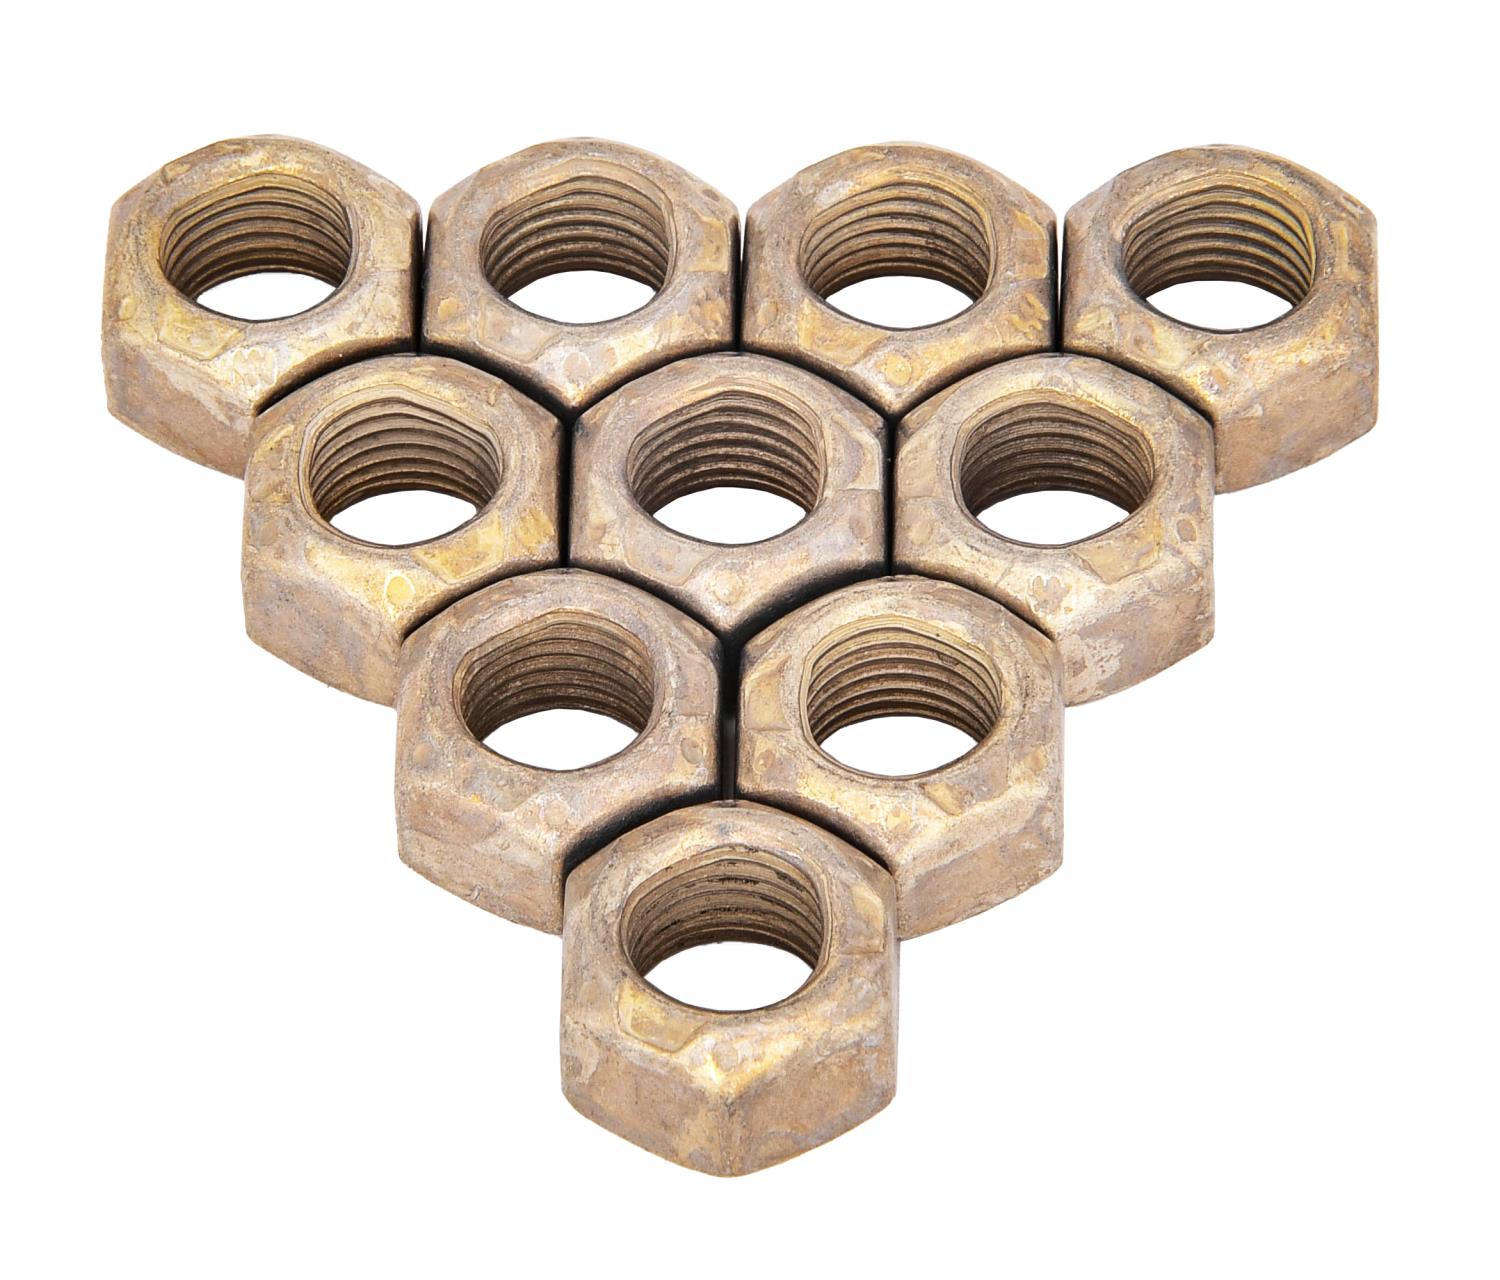 Stover (Distorted Thread) Lock Nut, 3/8 in.-24, Set of 10